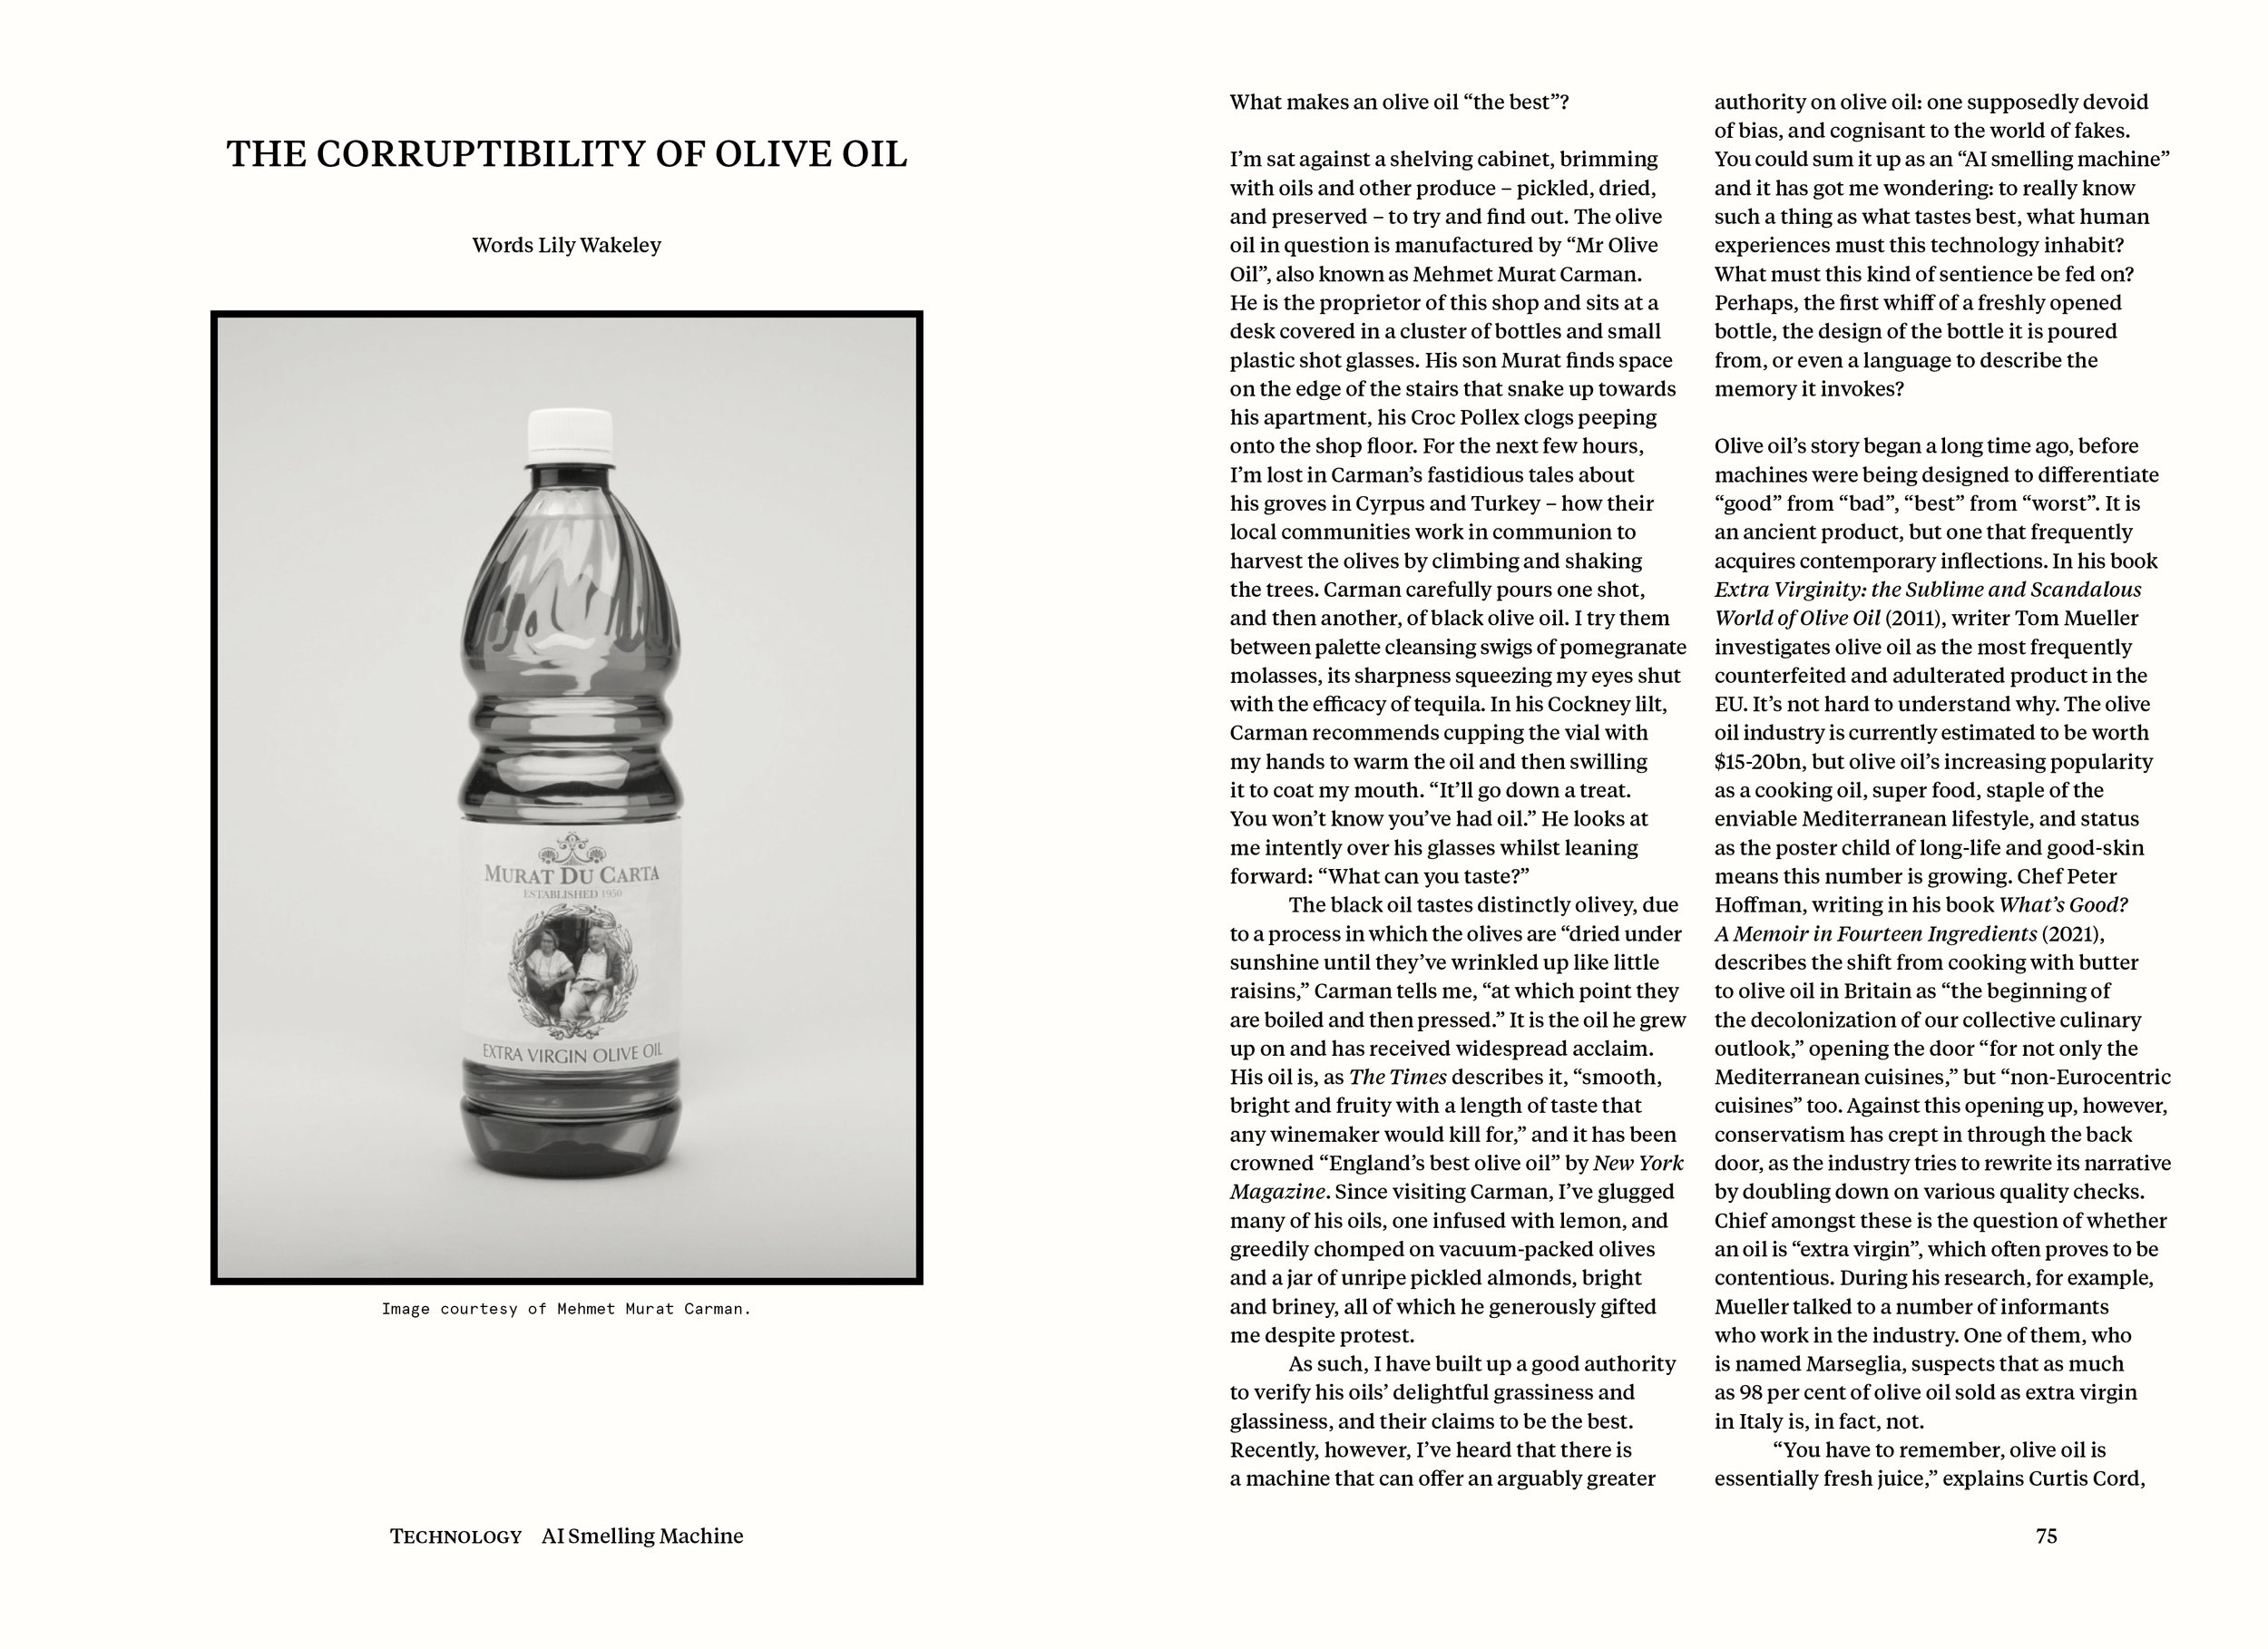  ‘The Corruptibility of Olive Oil’ by Lily Wakeley 